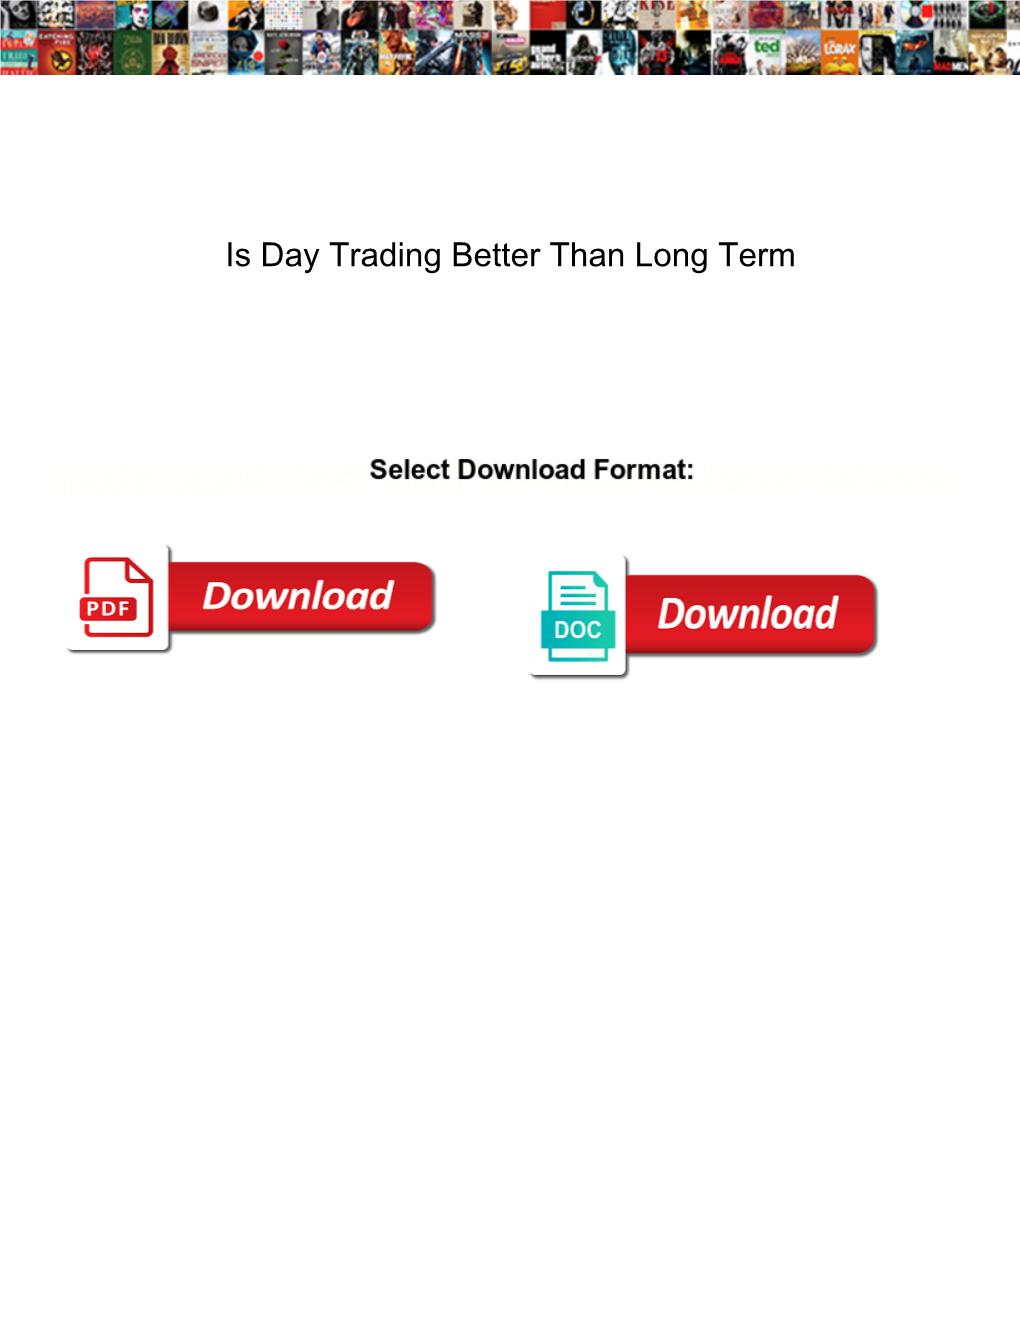 Is Day Trading Better Than Long Term